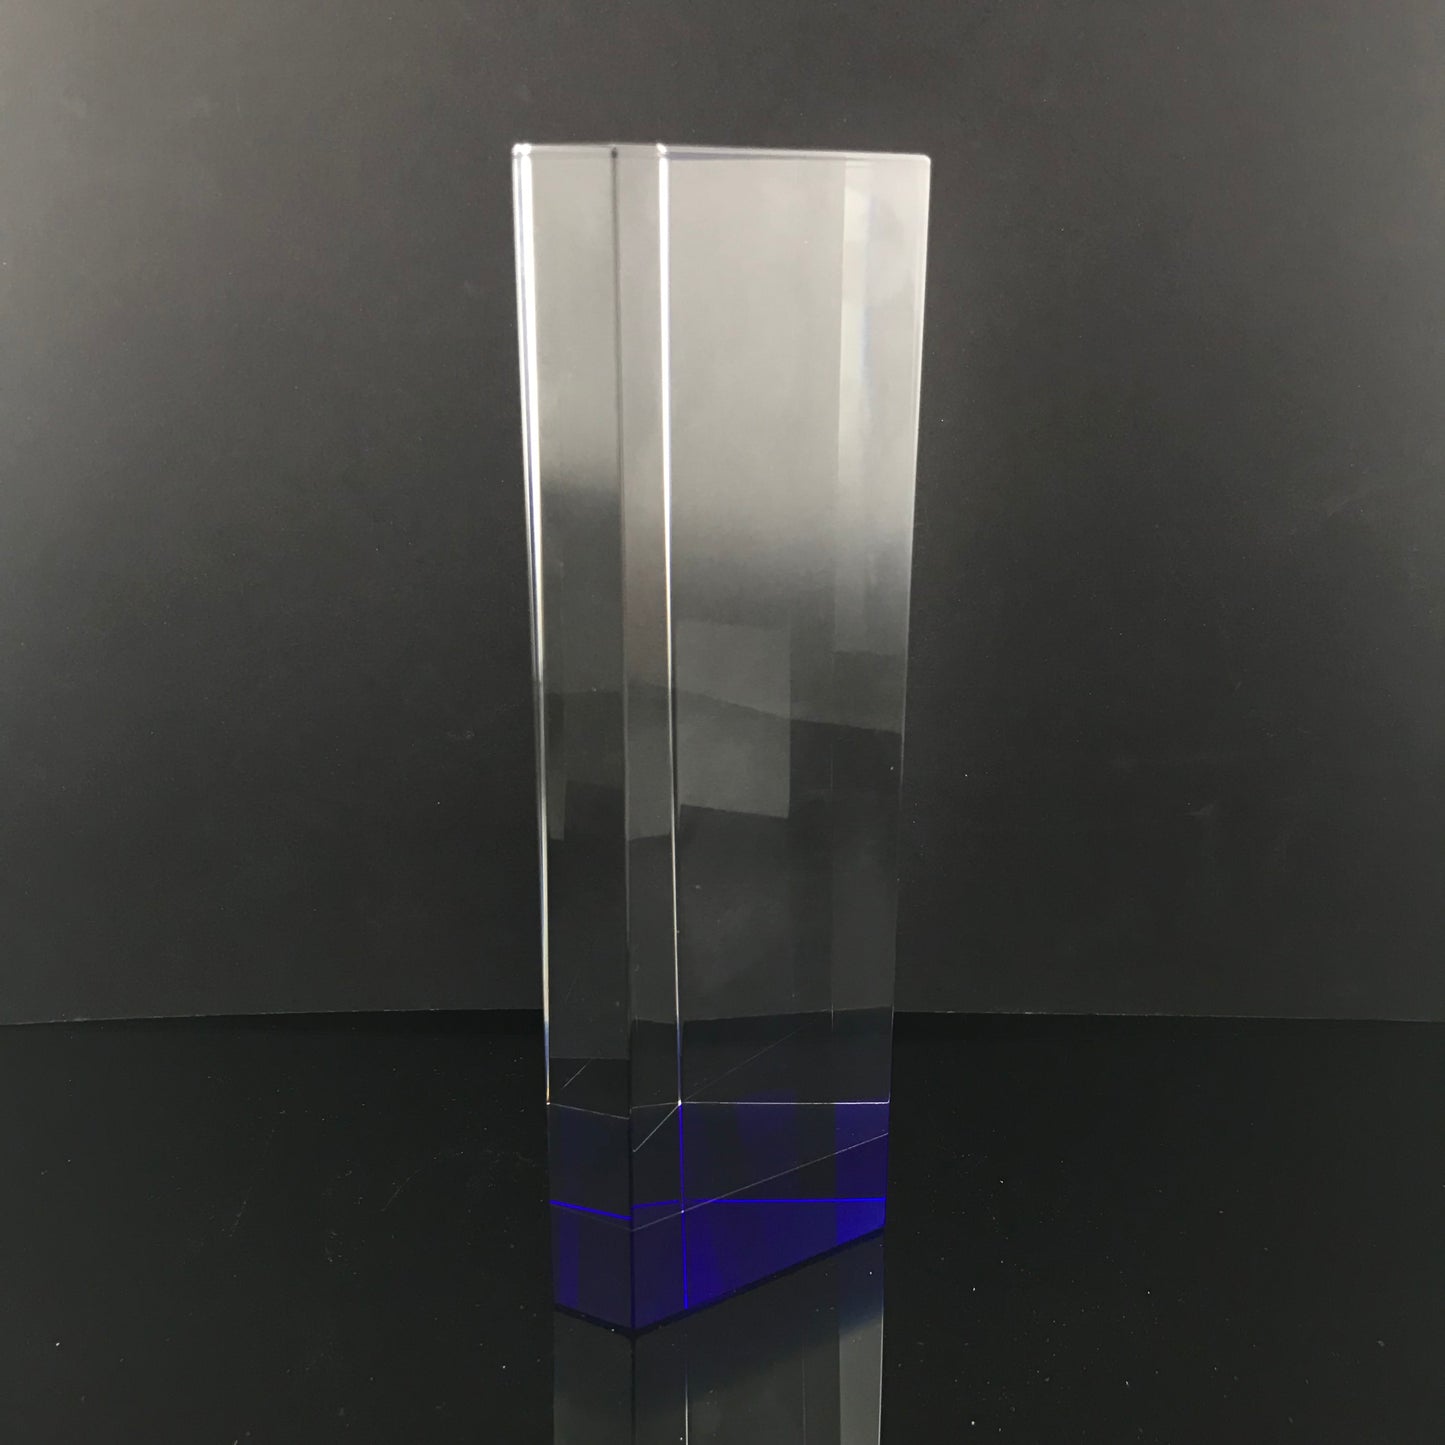 Achievement Crystal Award with Blue Base